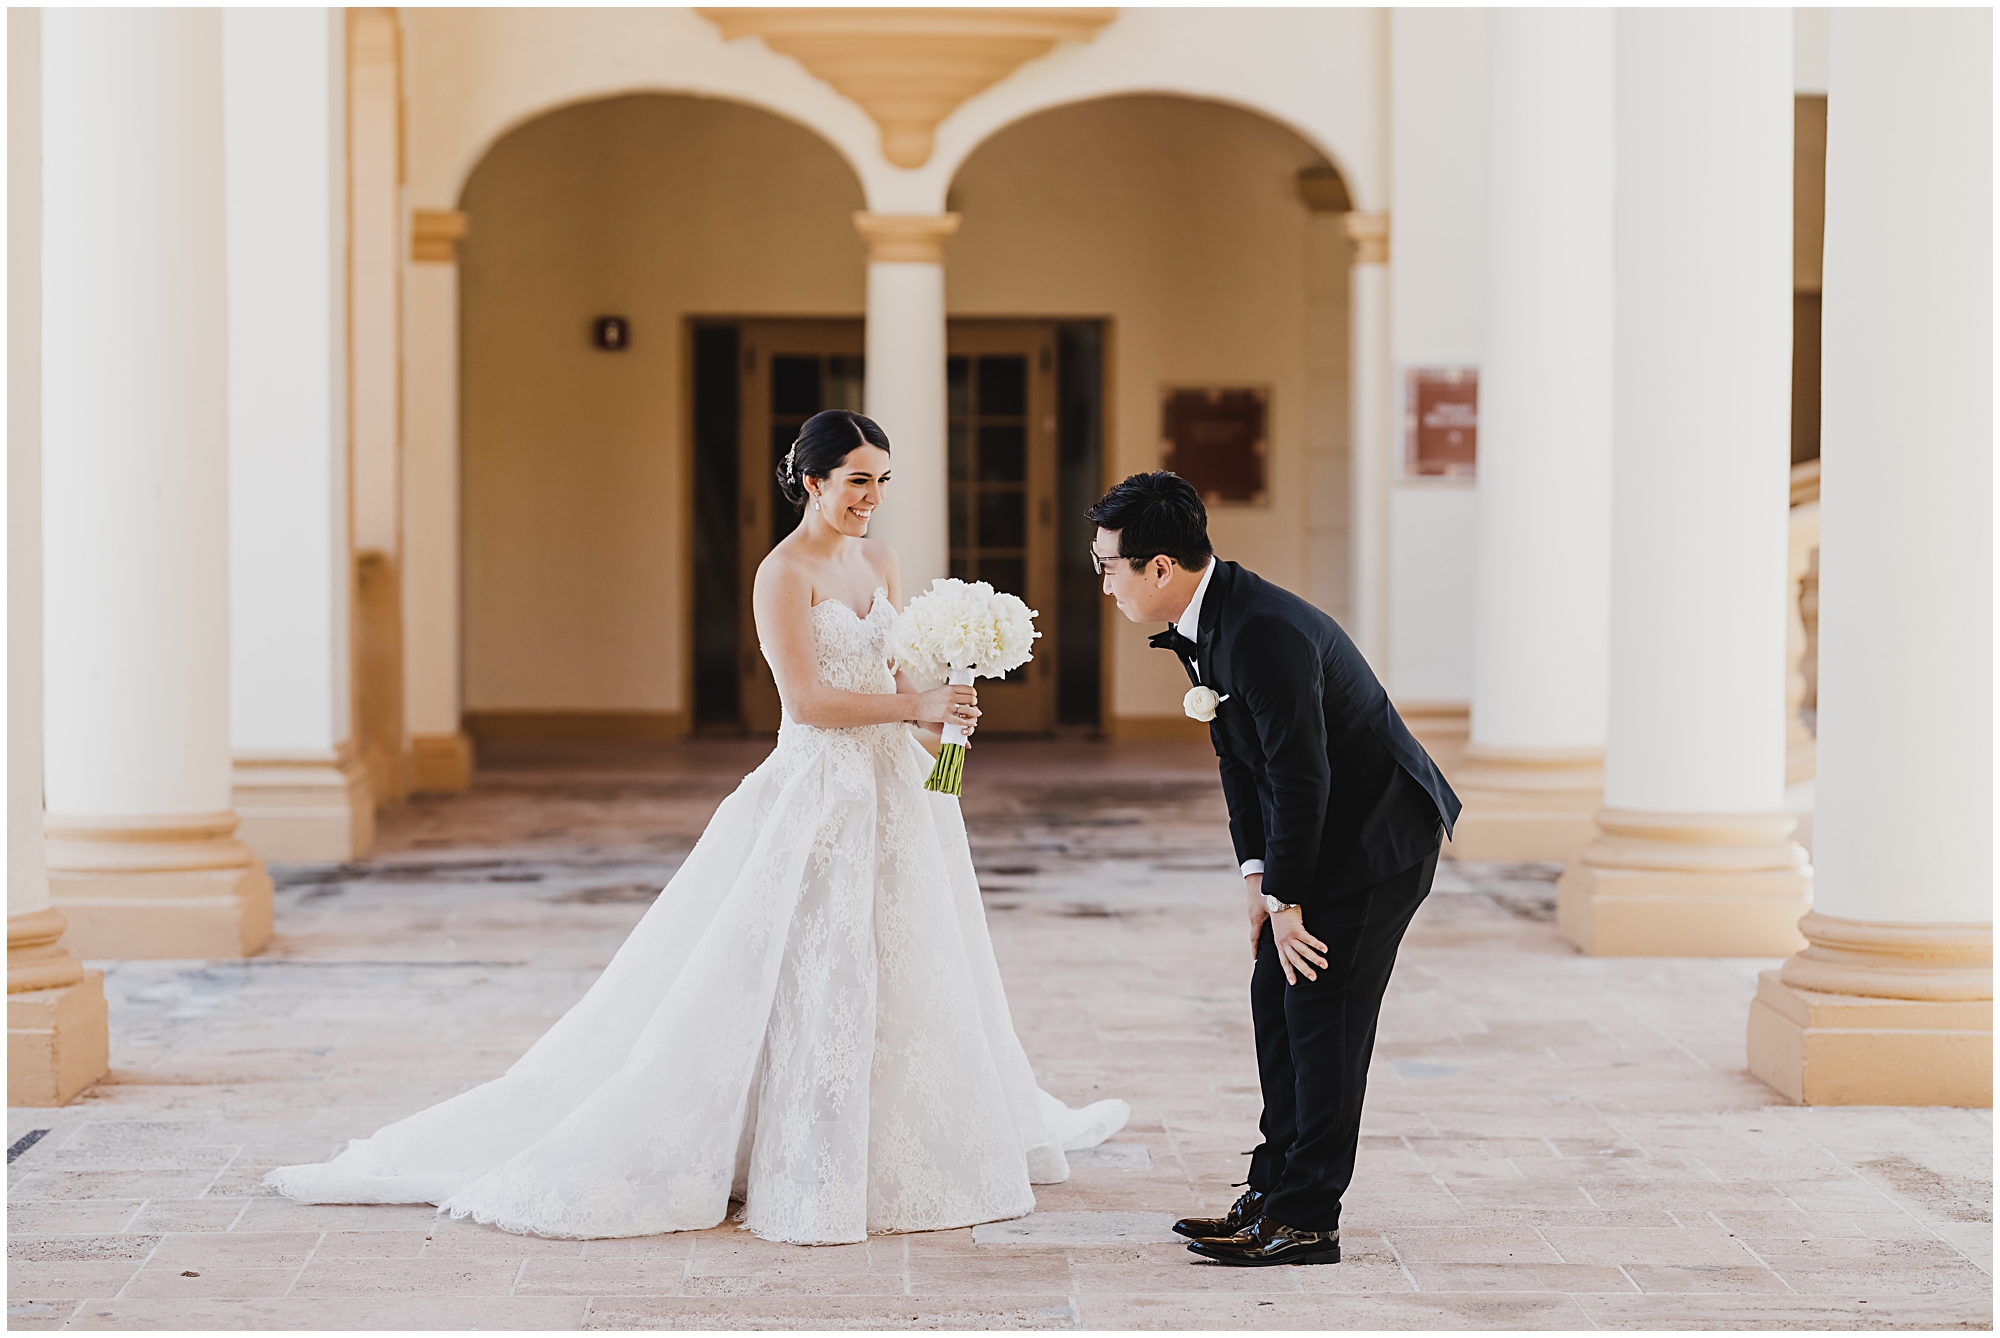 First look of the bride at the Biltmore Hotel in Coral gables.